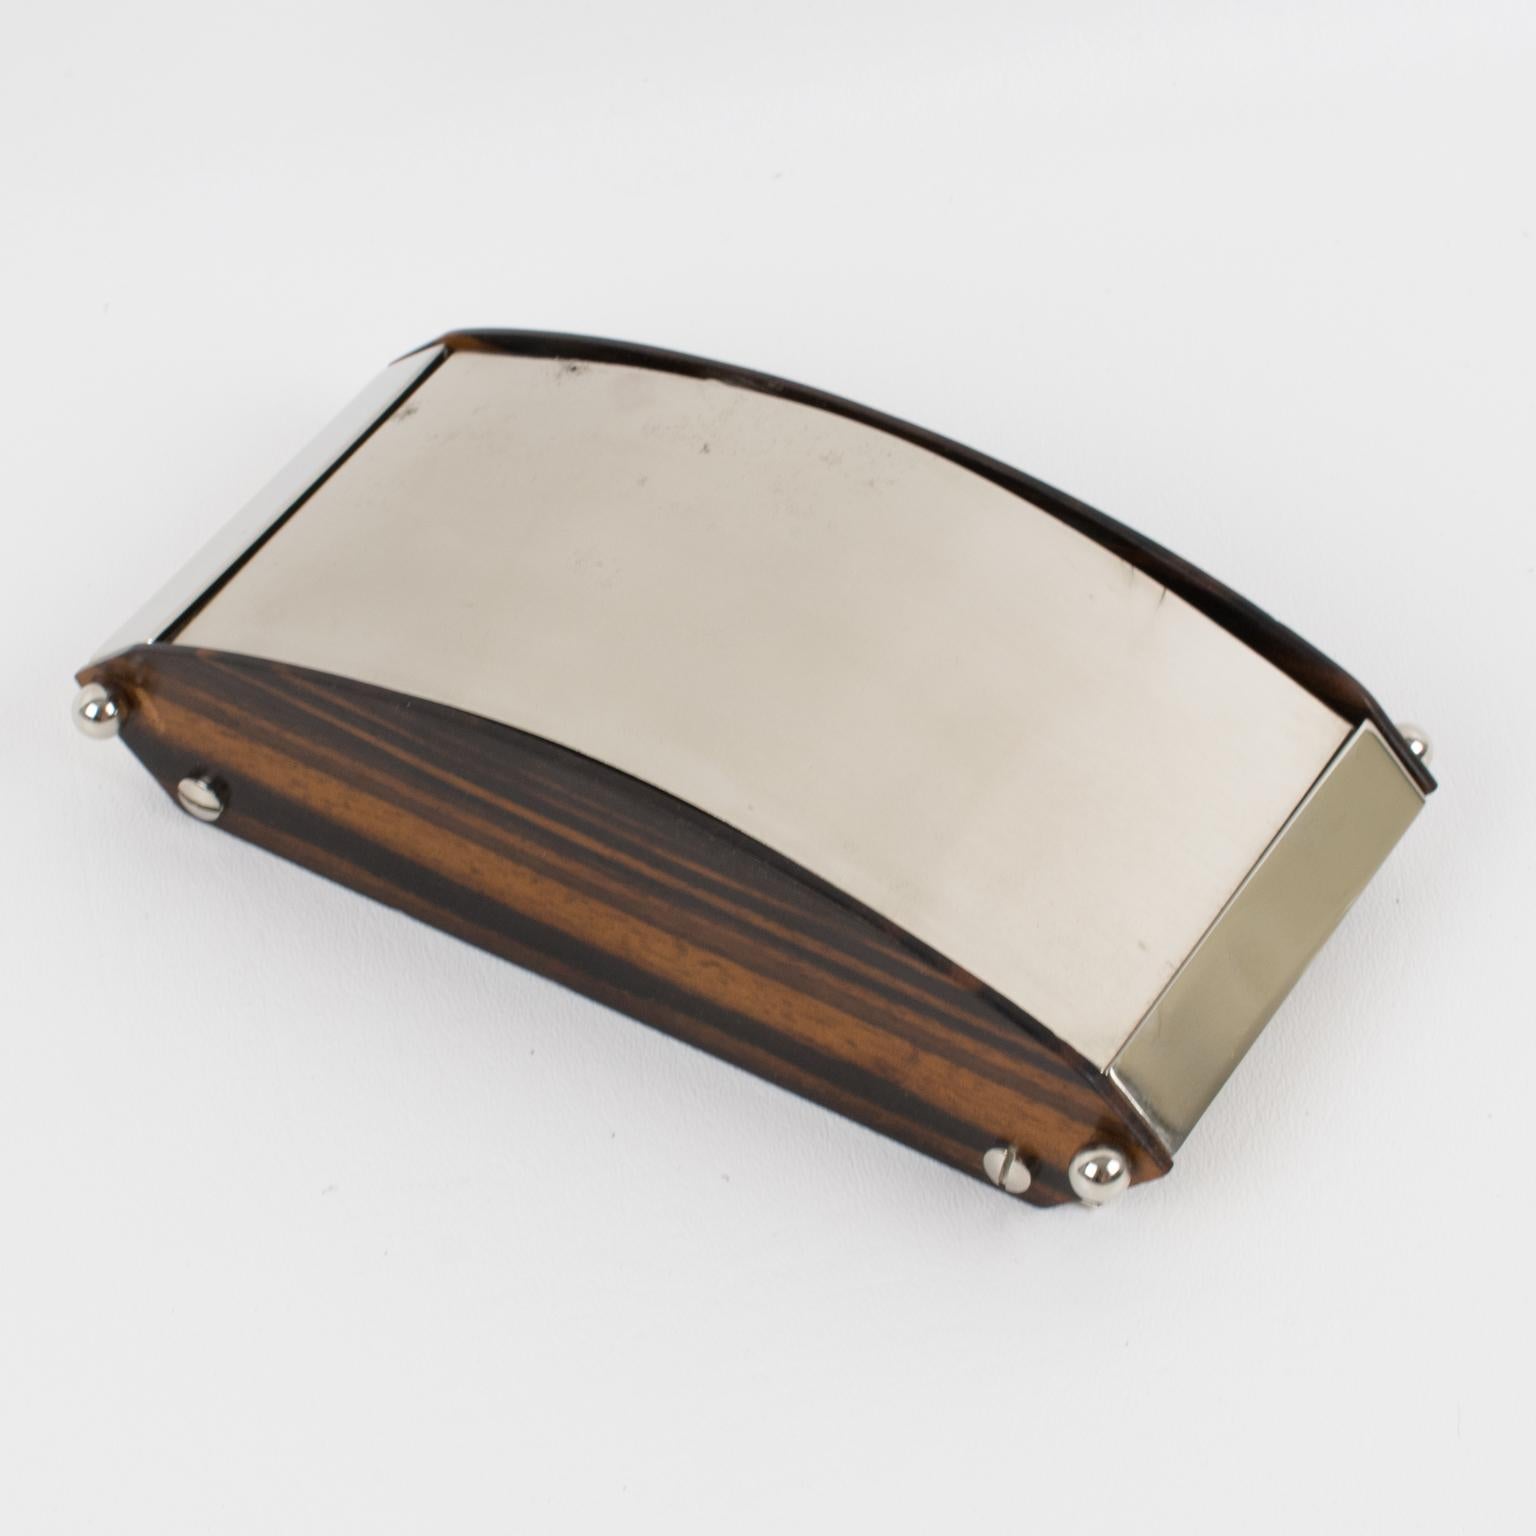 Mid-20th Century Maison Desny Style Art Deco Macassar Wood and Chrome Metal Box, 1930s For Sale